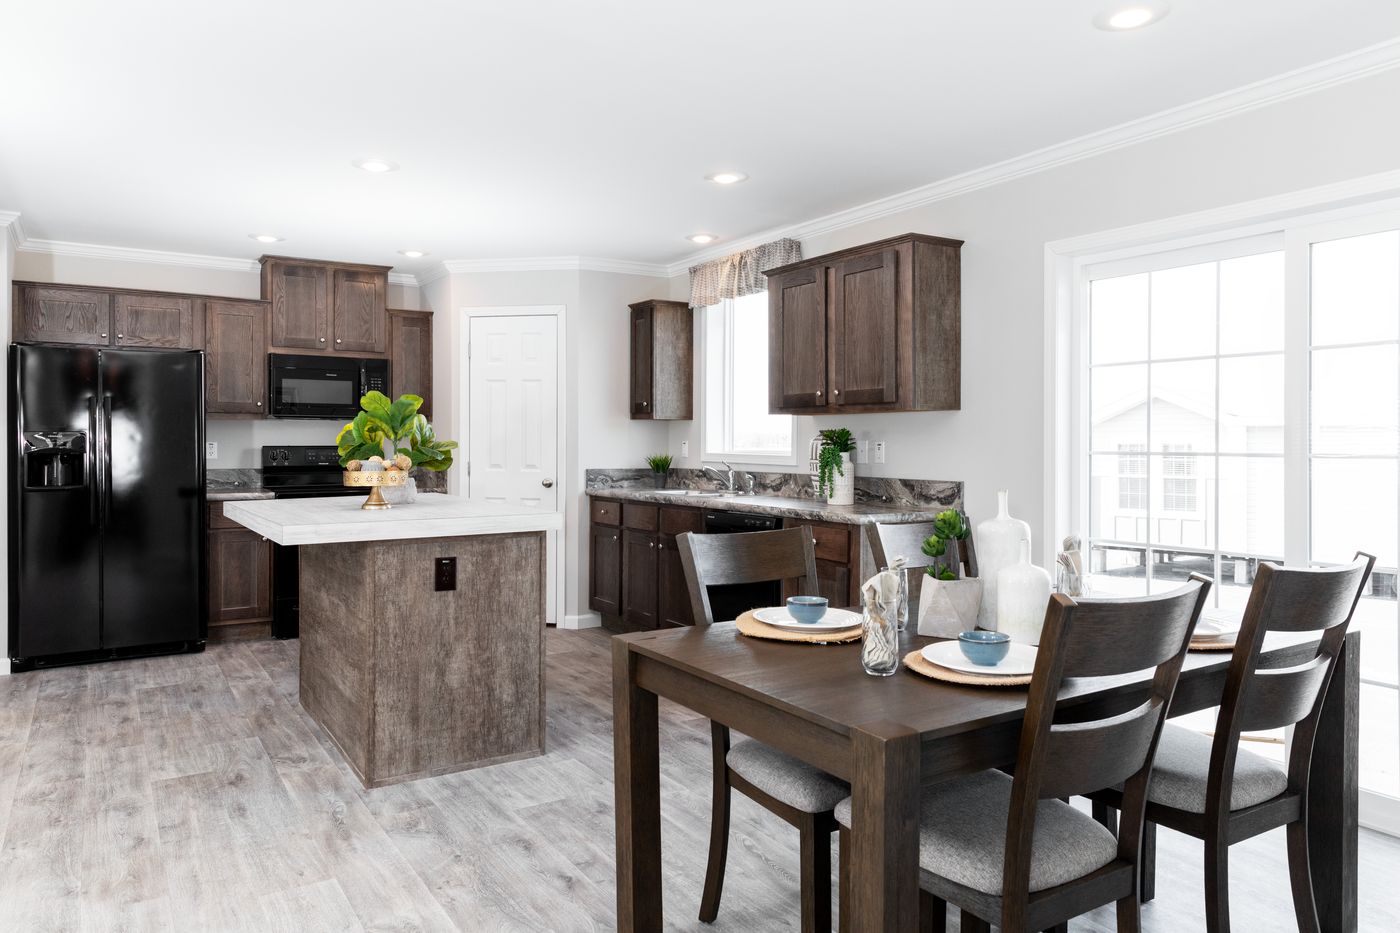 The THE VILLETTE Kitchen. This Manufactured Mobile Home features 3 bedrooms and 2 baths.